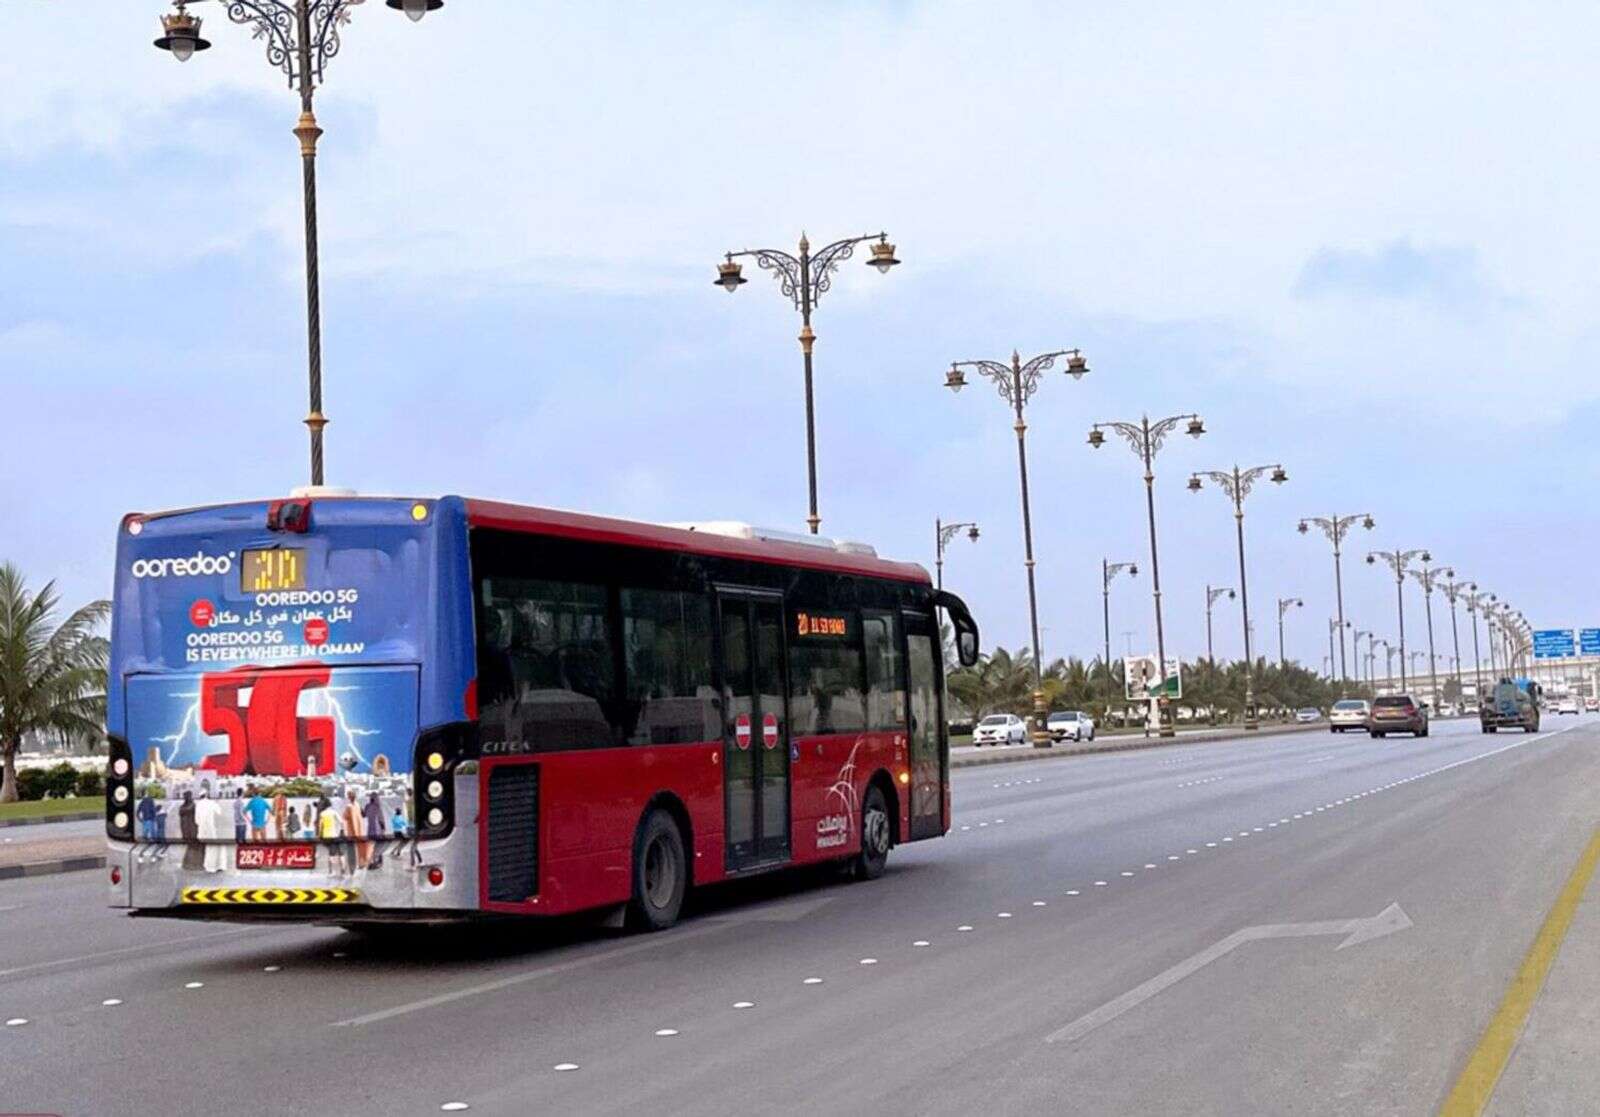 want to travel from uae to oman by bus? here are all the details you need